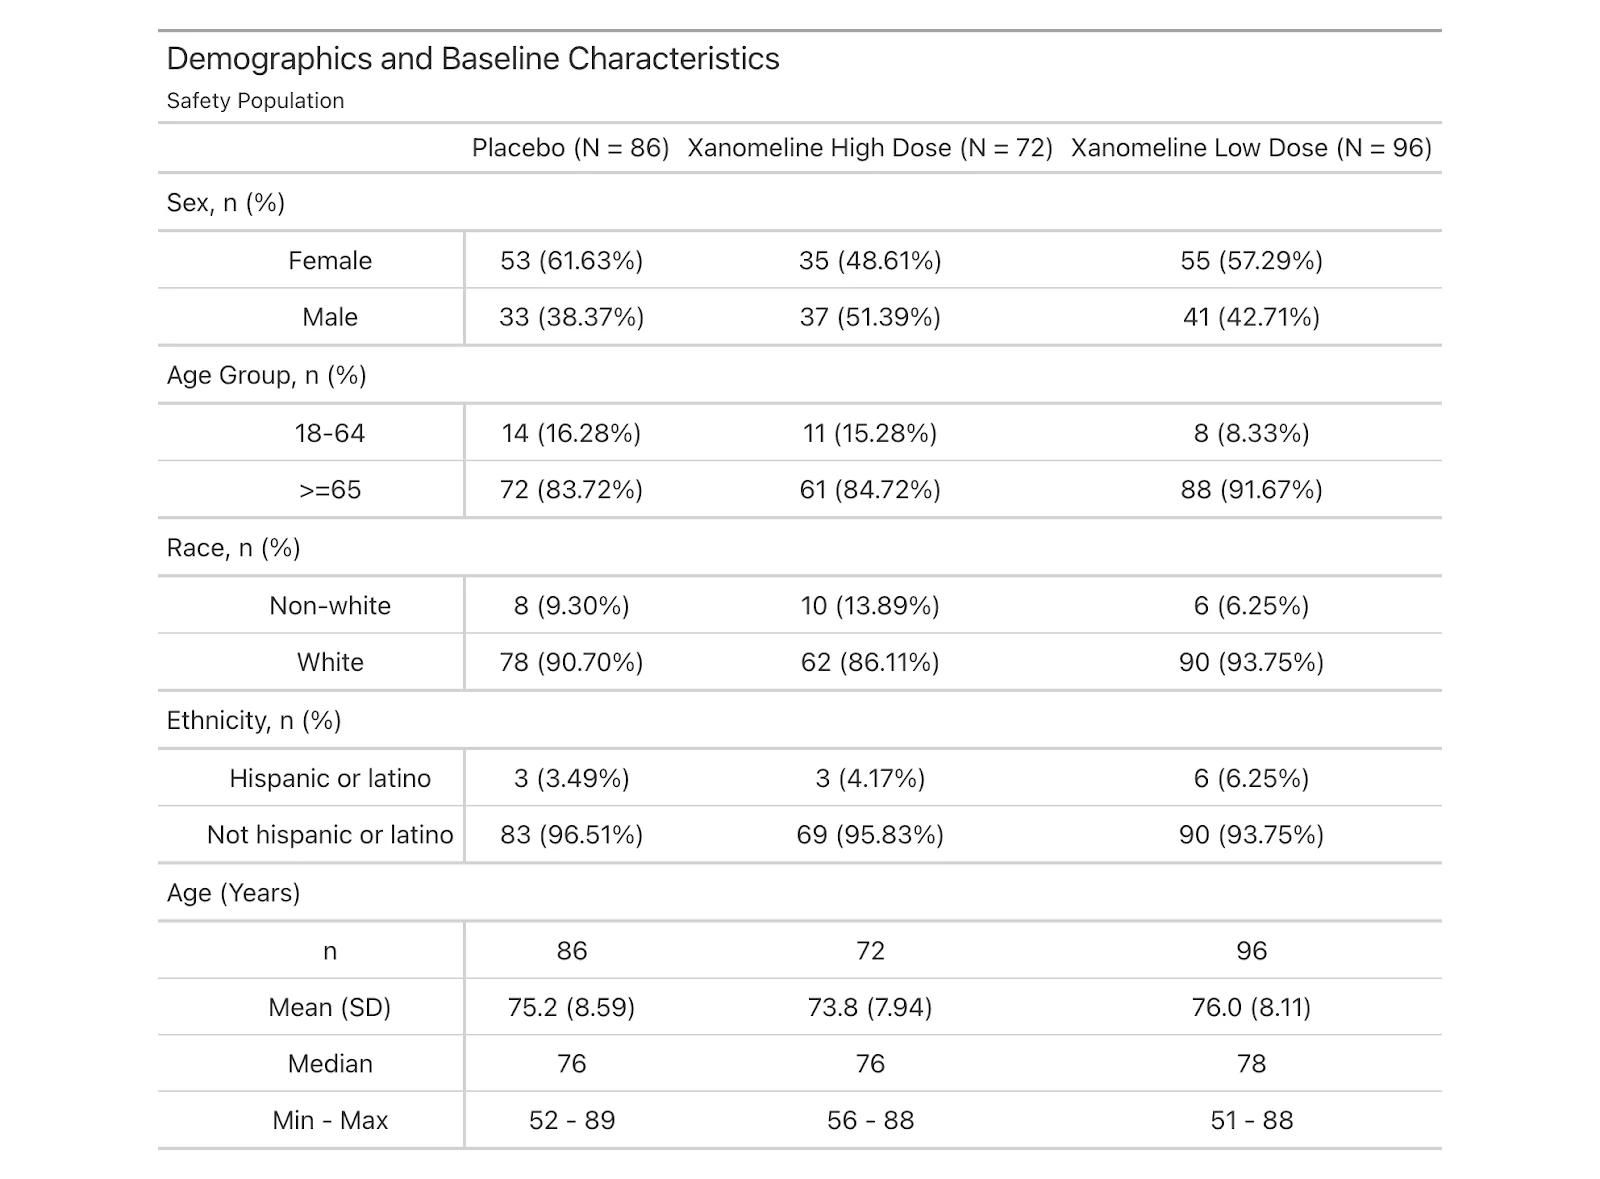 The table provides a breakdown of demographic information and baseline characteristics of participants in a clinical trial, detailing the safety population data for placebo, high dose, and low dose groups of the drug Xanomeline.